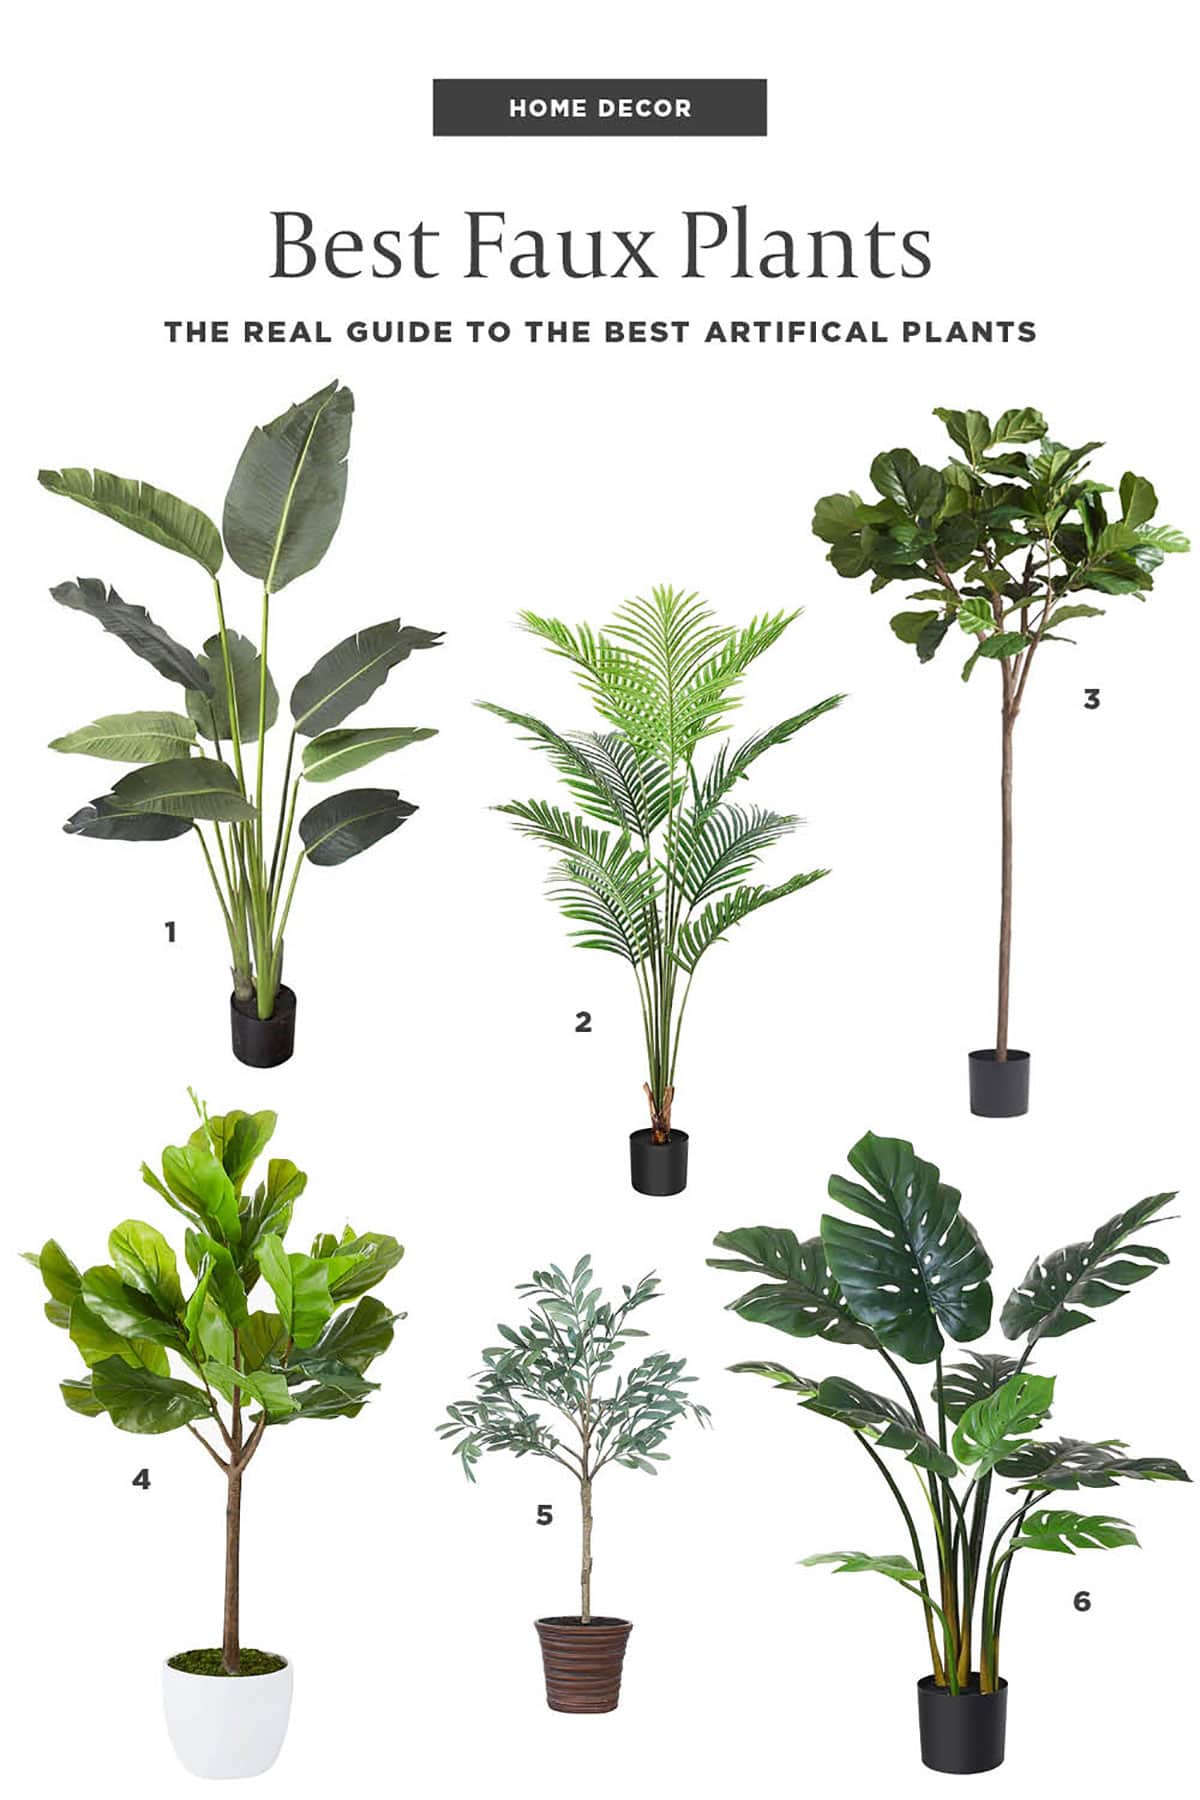 Guide to the best faux plants that look real - Fake plants are no longer a faux pas. Elevate your home decor with these 23 artificial plants that look so real you'll fool an interior designer!